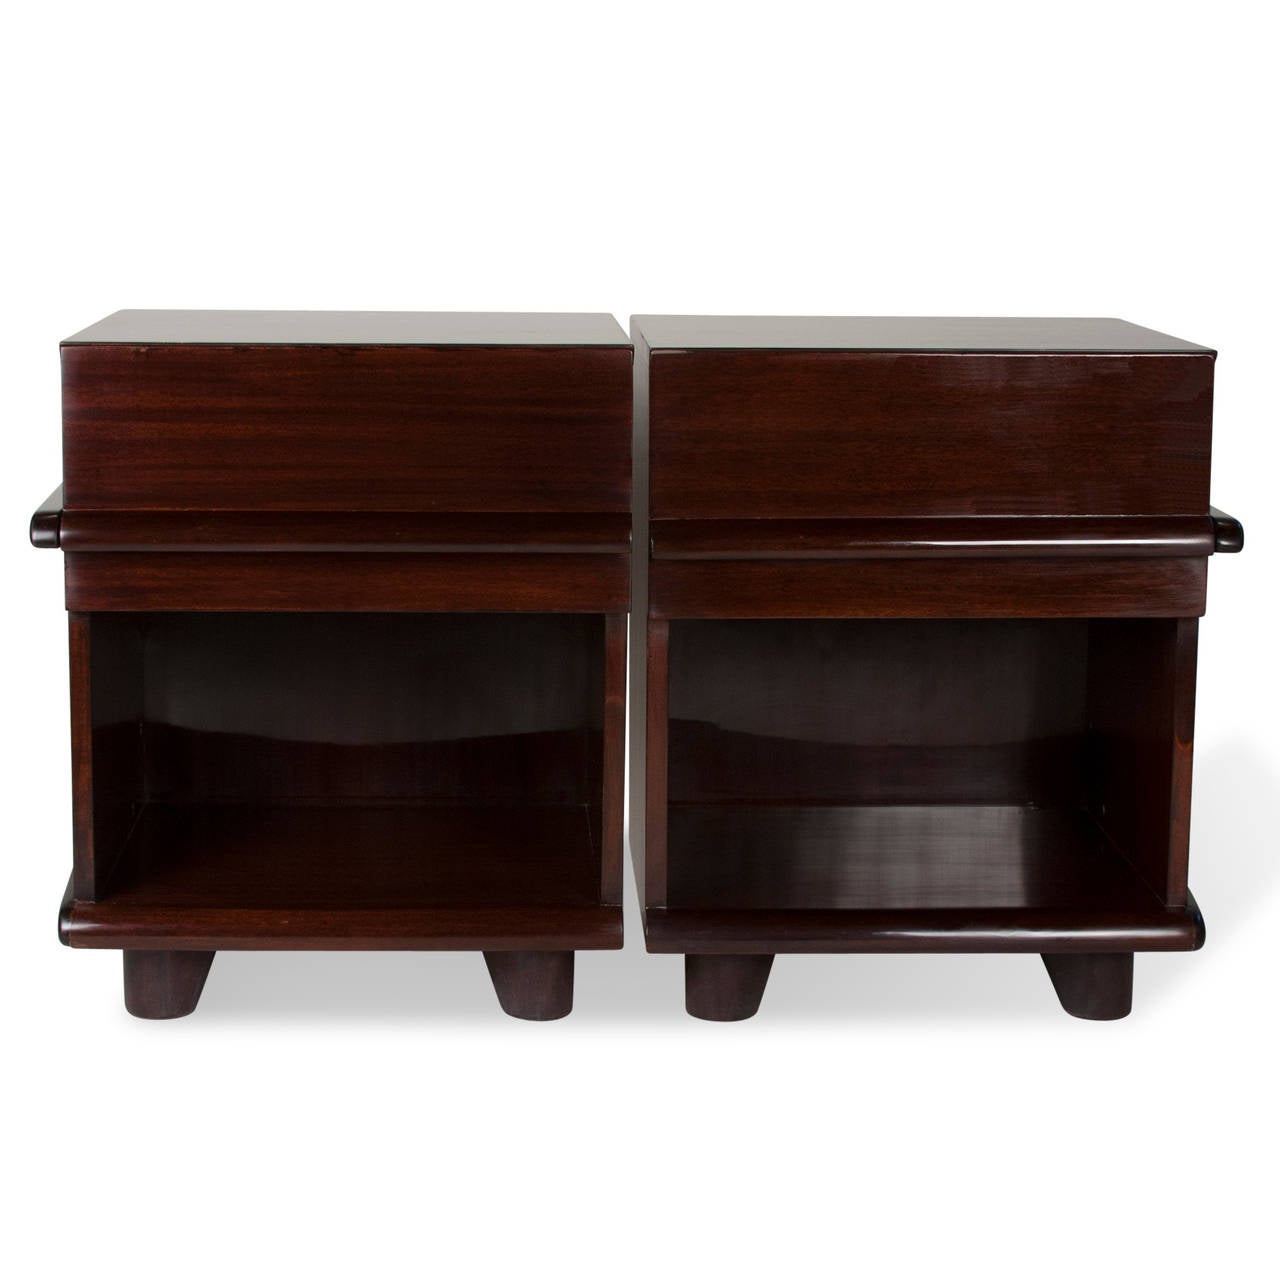 Pair of walnut end tables, upper drawer and open lower storage compartment, having molded element that crosses the front of drawer and wraps around to the side. Short wide circular legs. An opposing pair, American, 1970s. Width 20 in, depth 18 in,